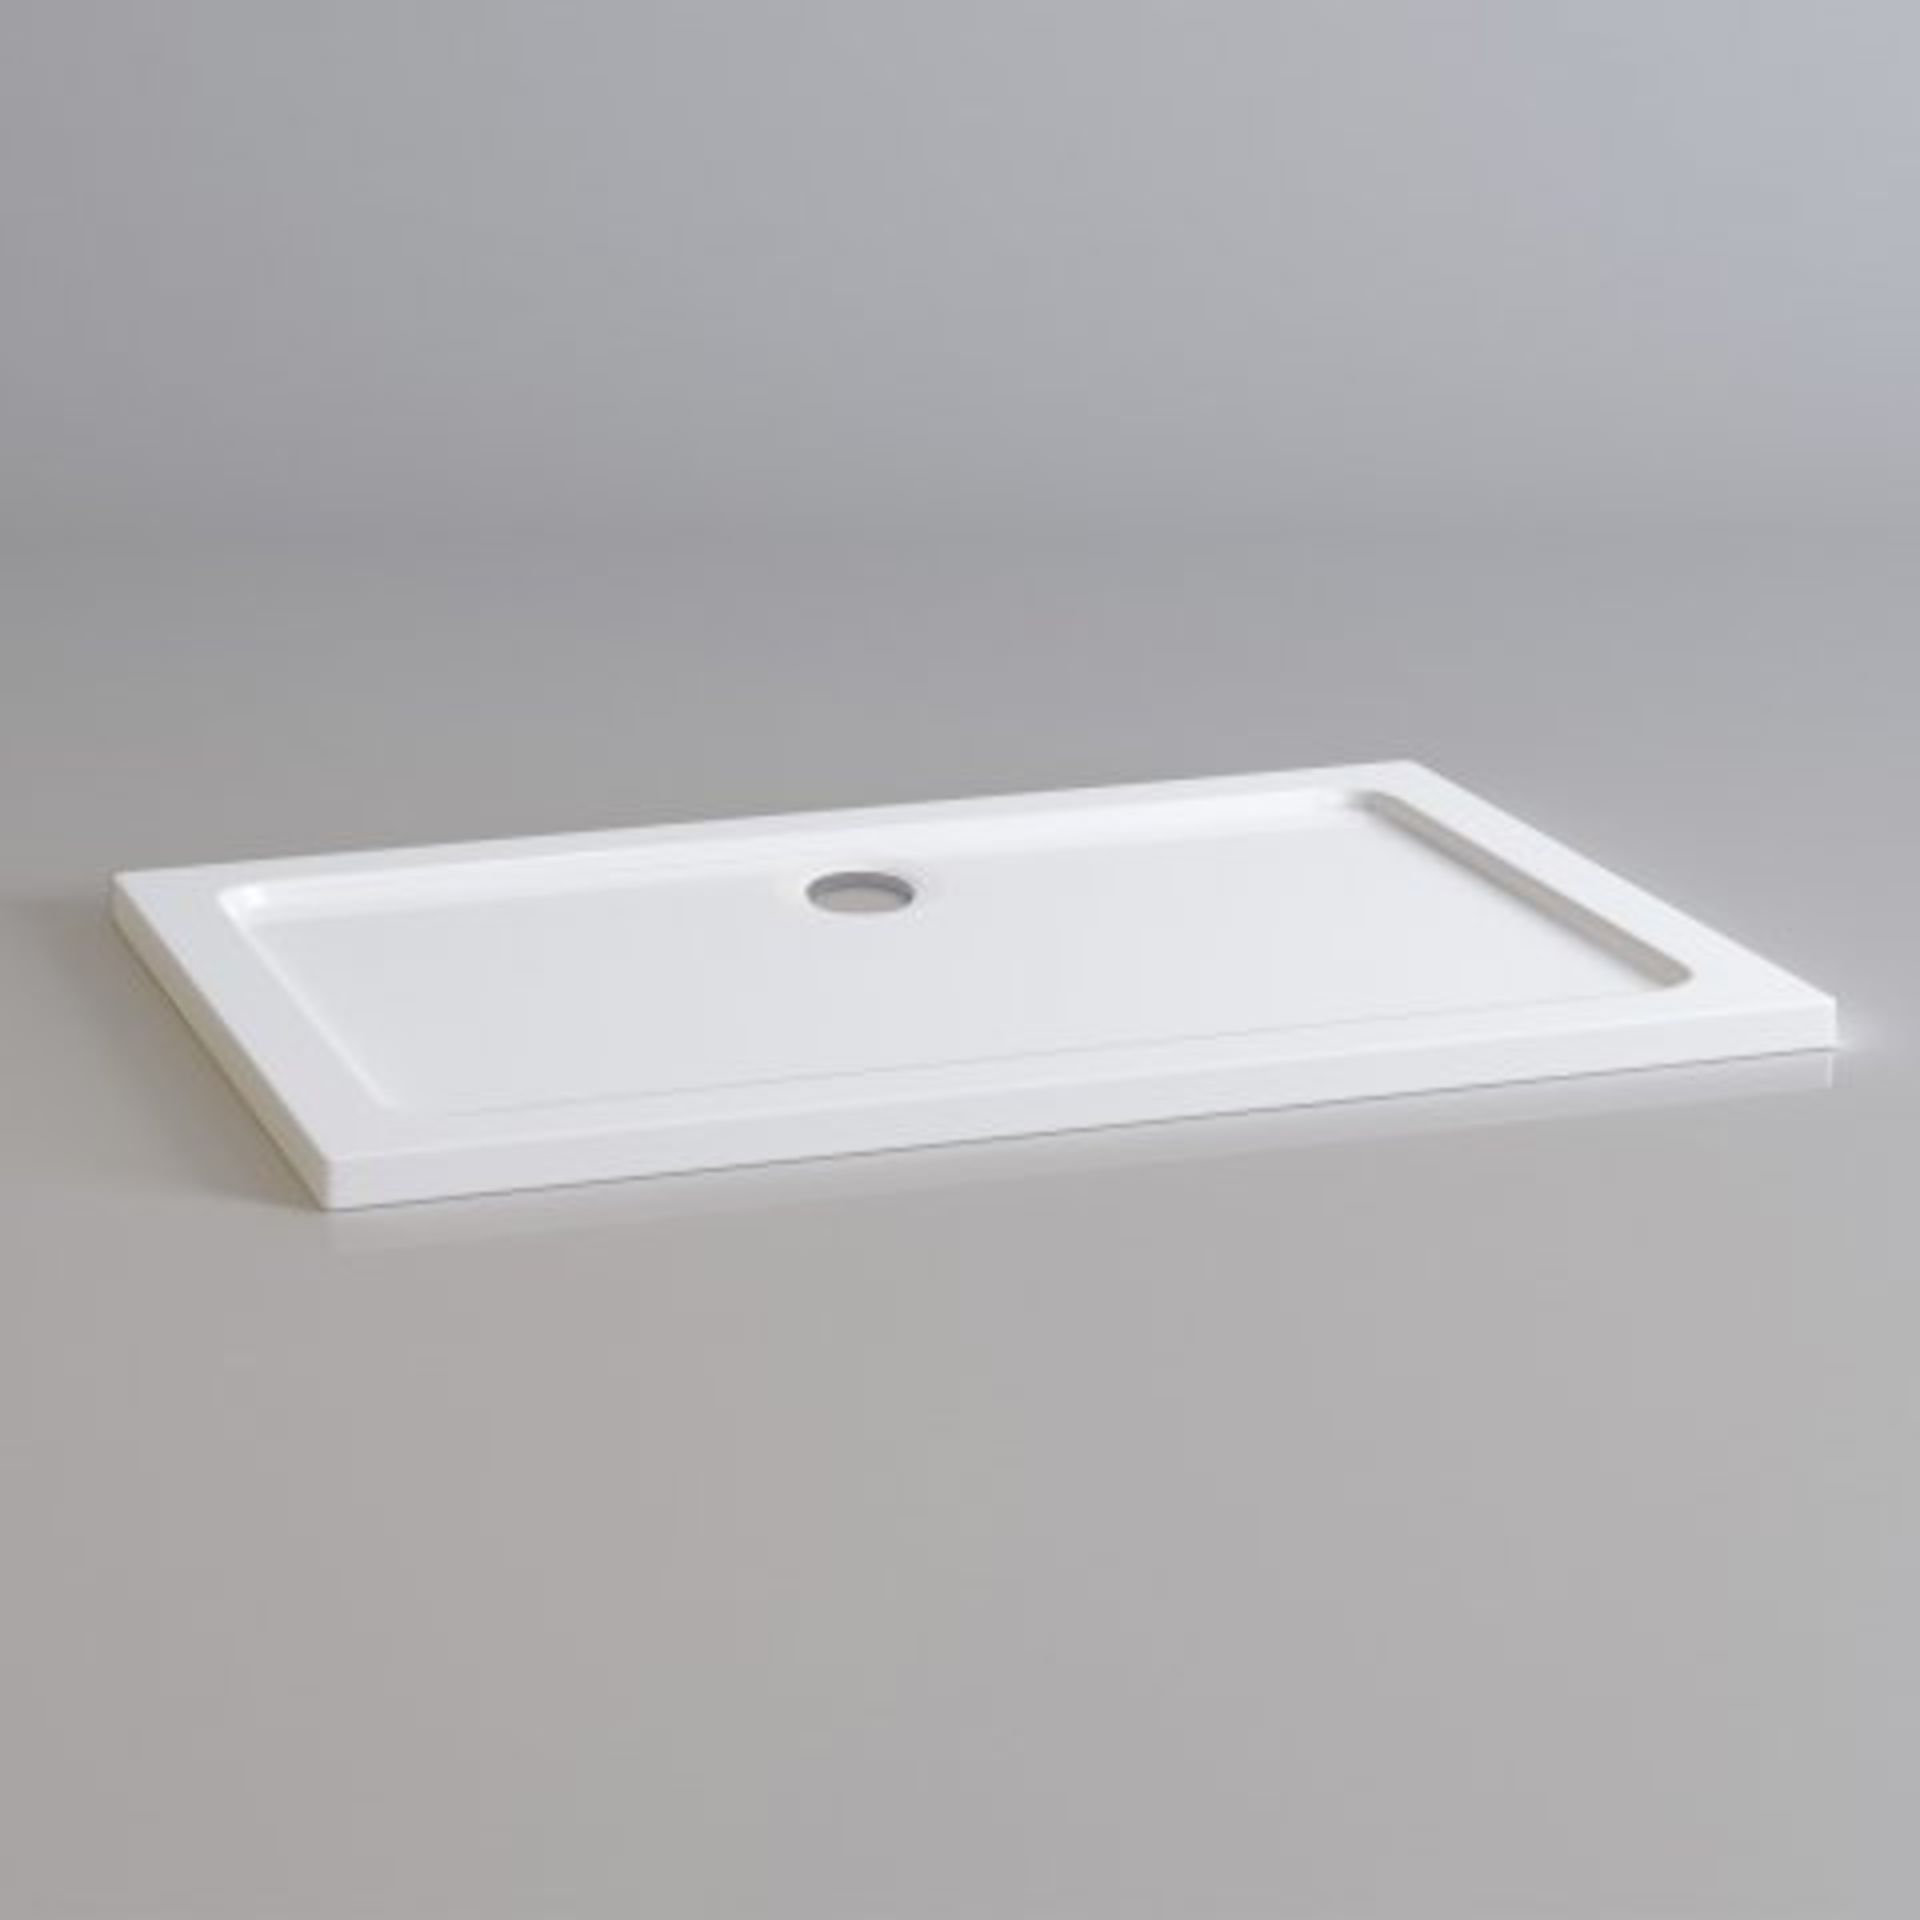 (A539) 1200x800mm Rectangular Ultra Slim Stone Shower Tray. RRP £274.99. Designed and made carefully